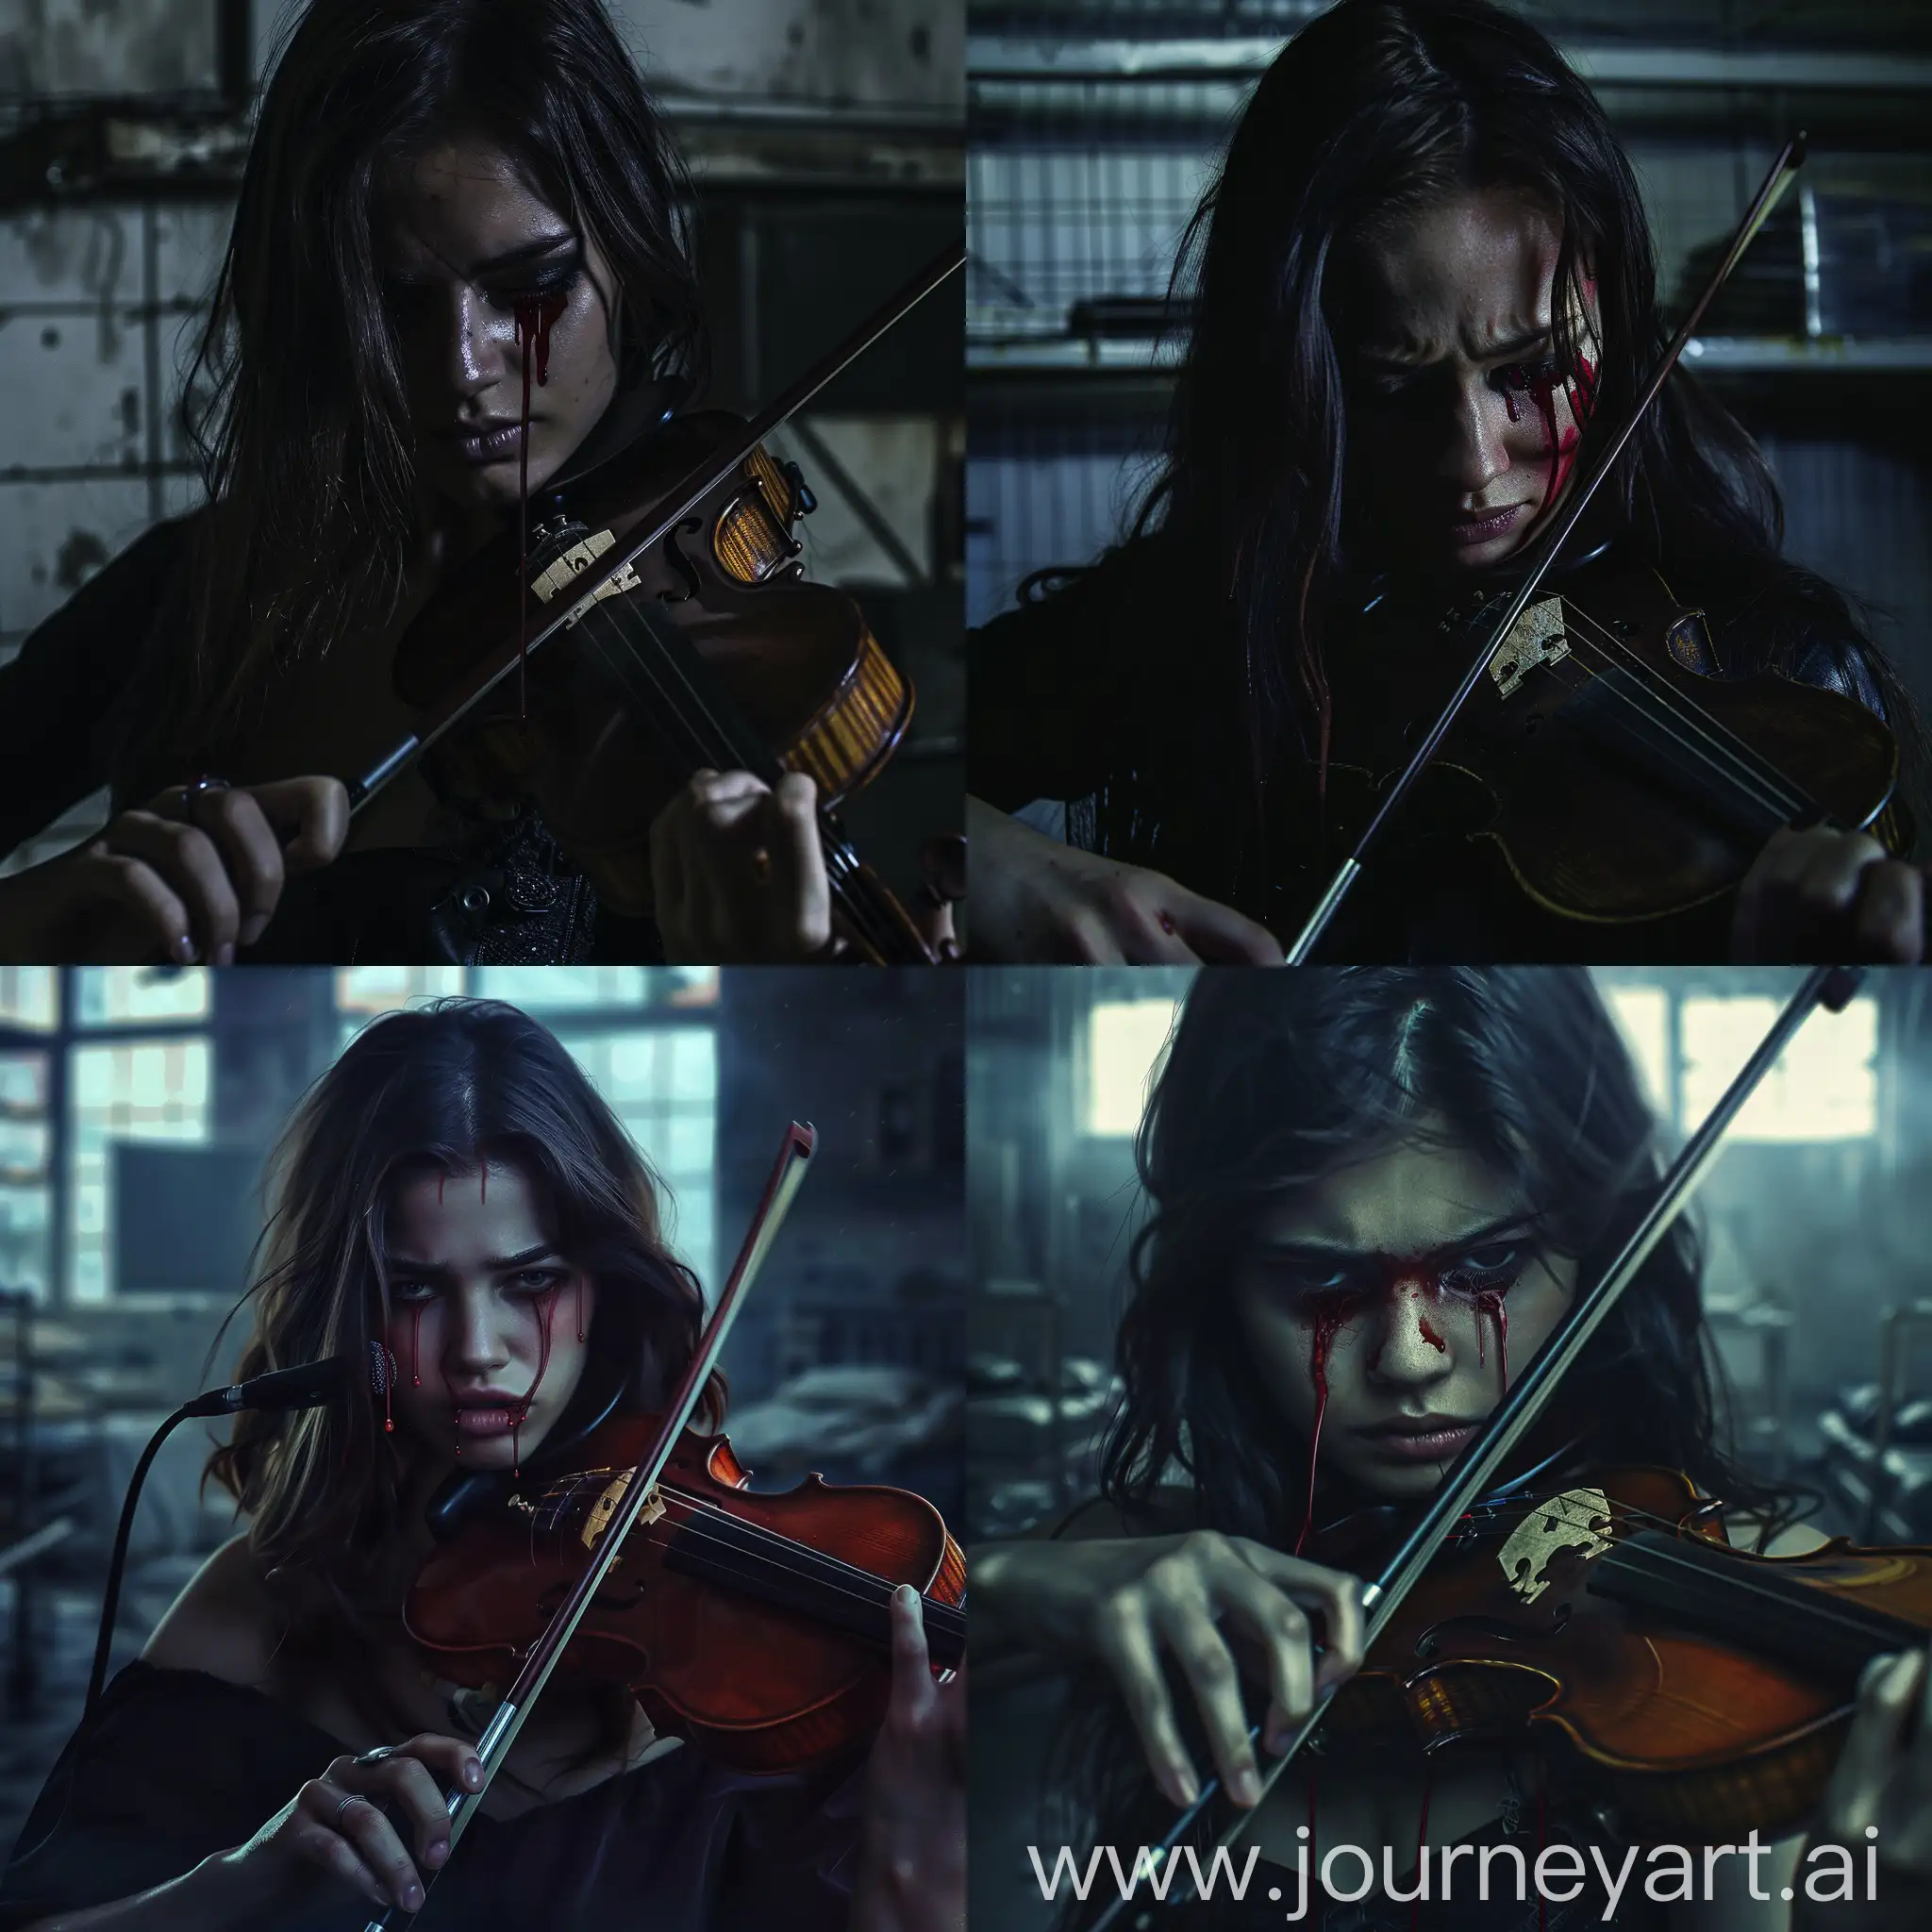 Sad-Brunette-Woman-Playing-Violin-with-Crimson-Tears-in-Dark-Morgue